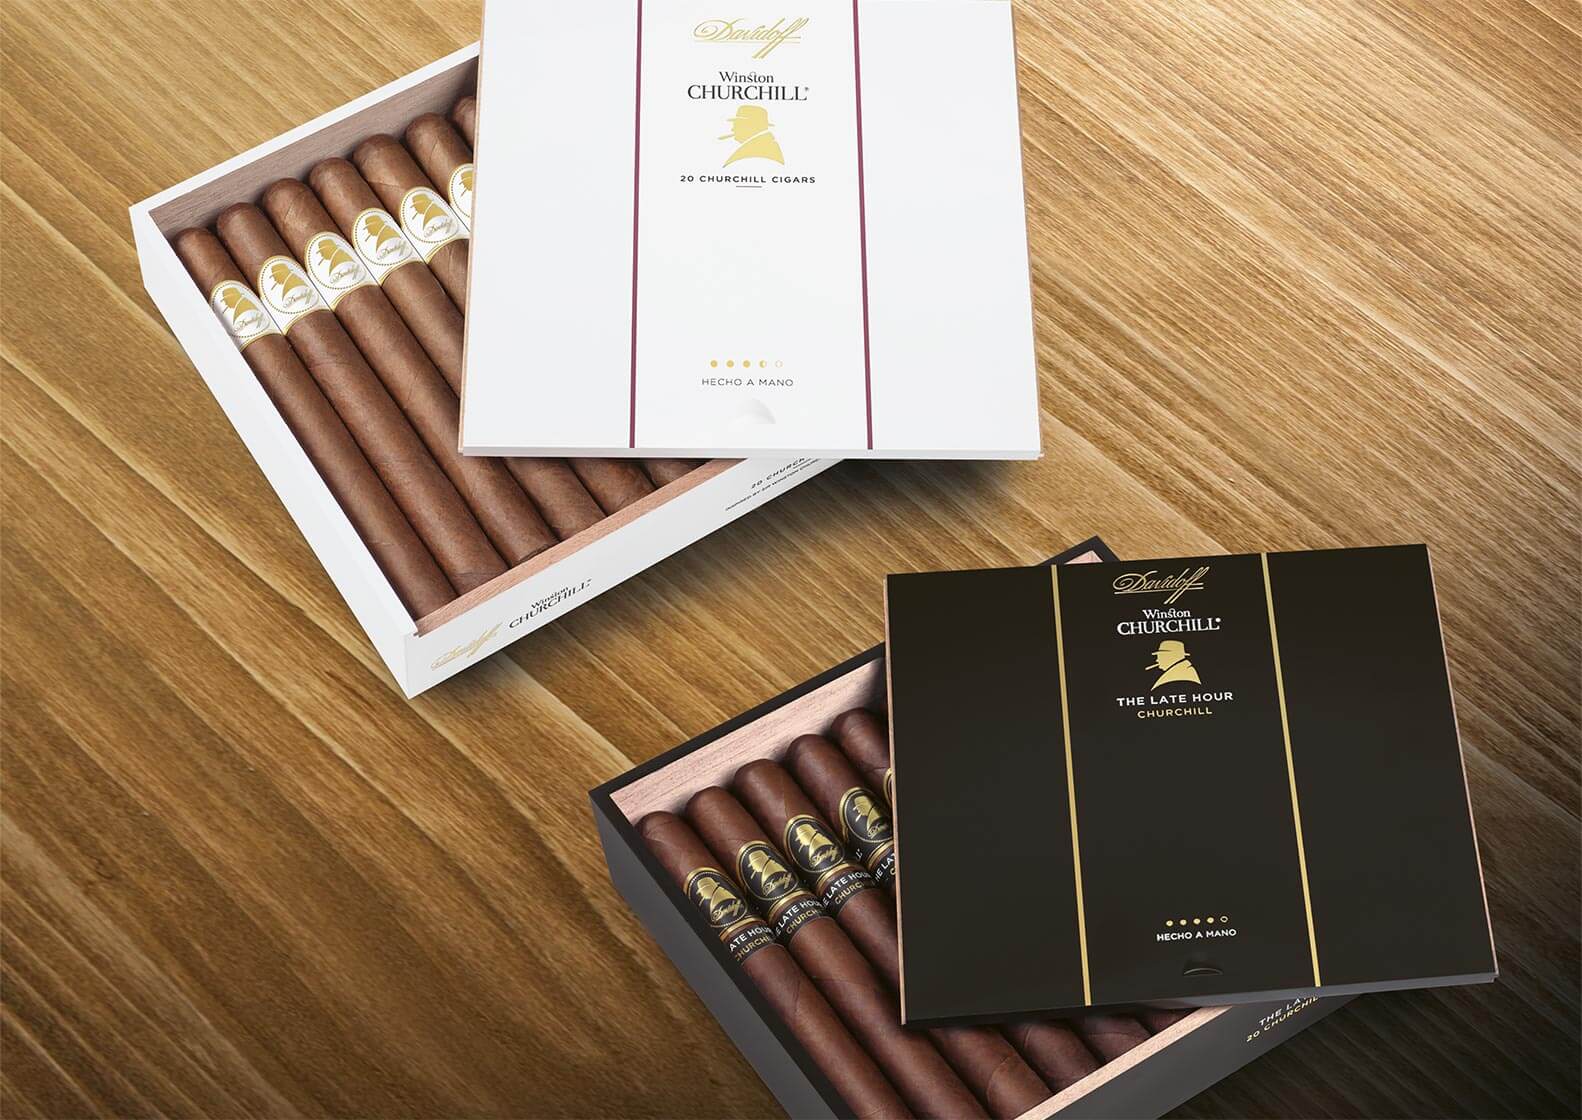 Open Davidoff Winston Churchill Original Series and Late Hour Series Cigar Boxes on a wooden underground